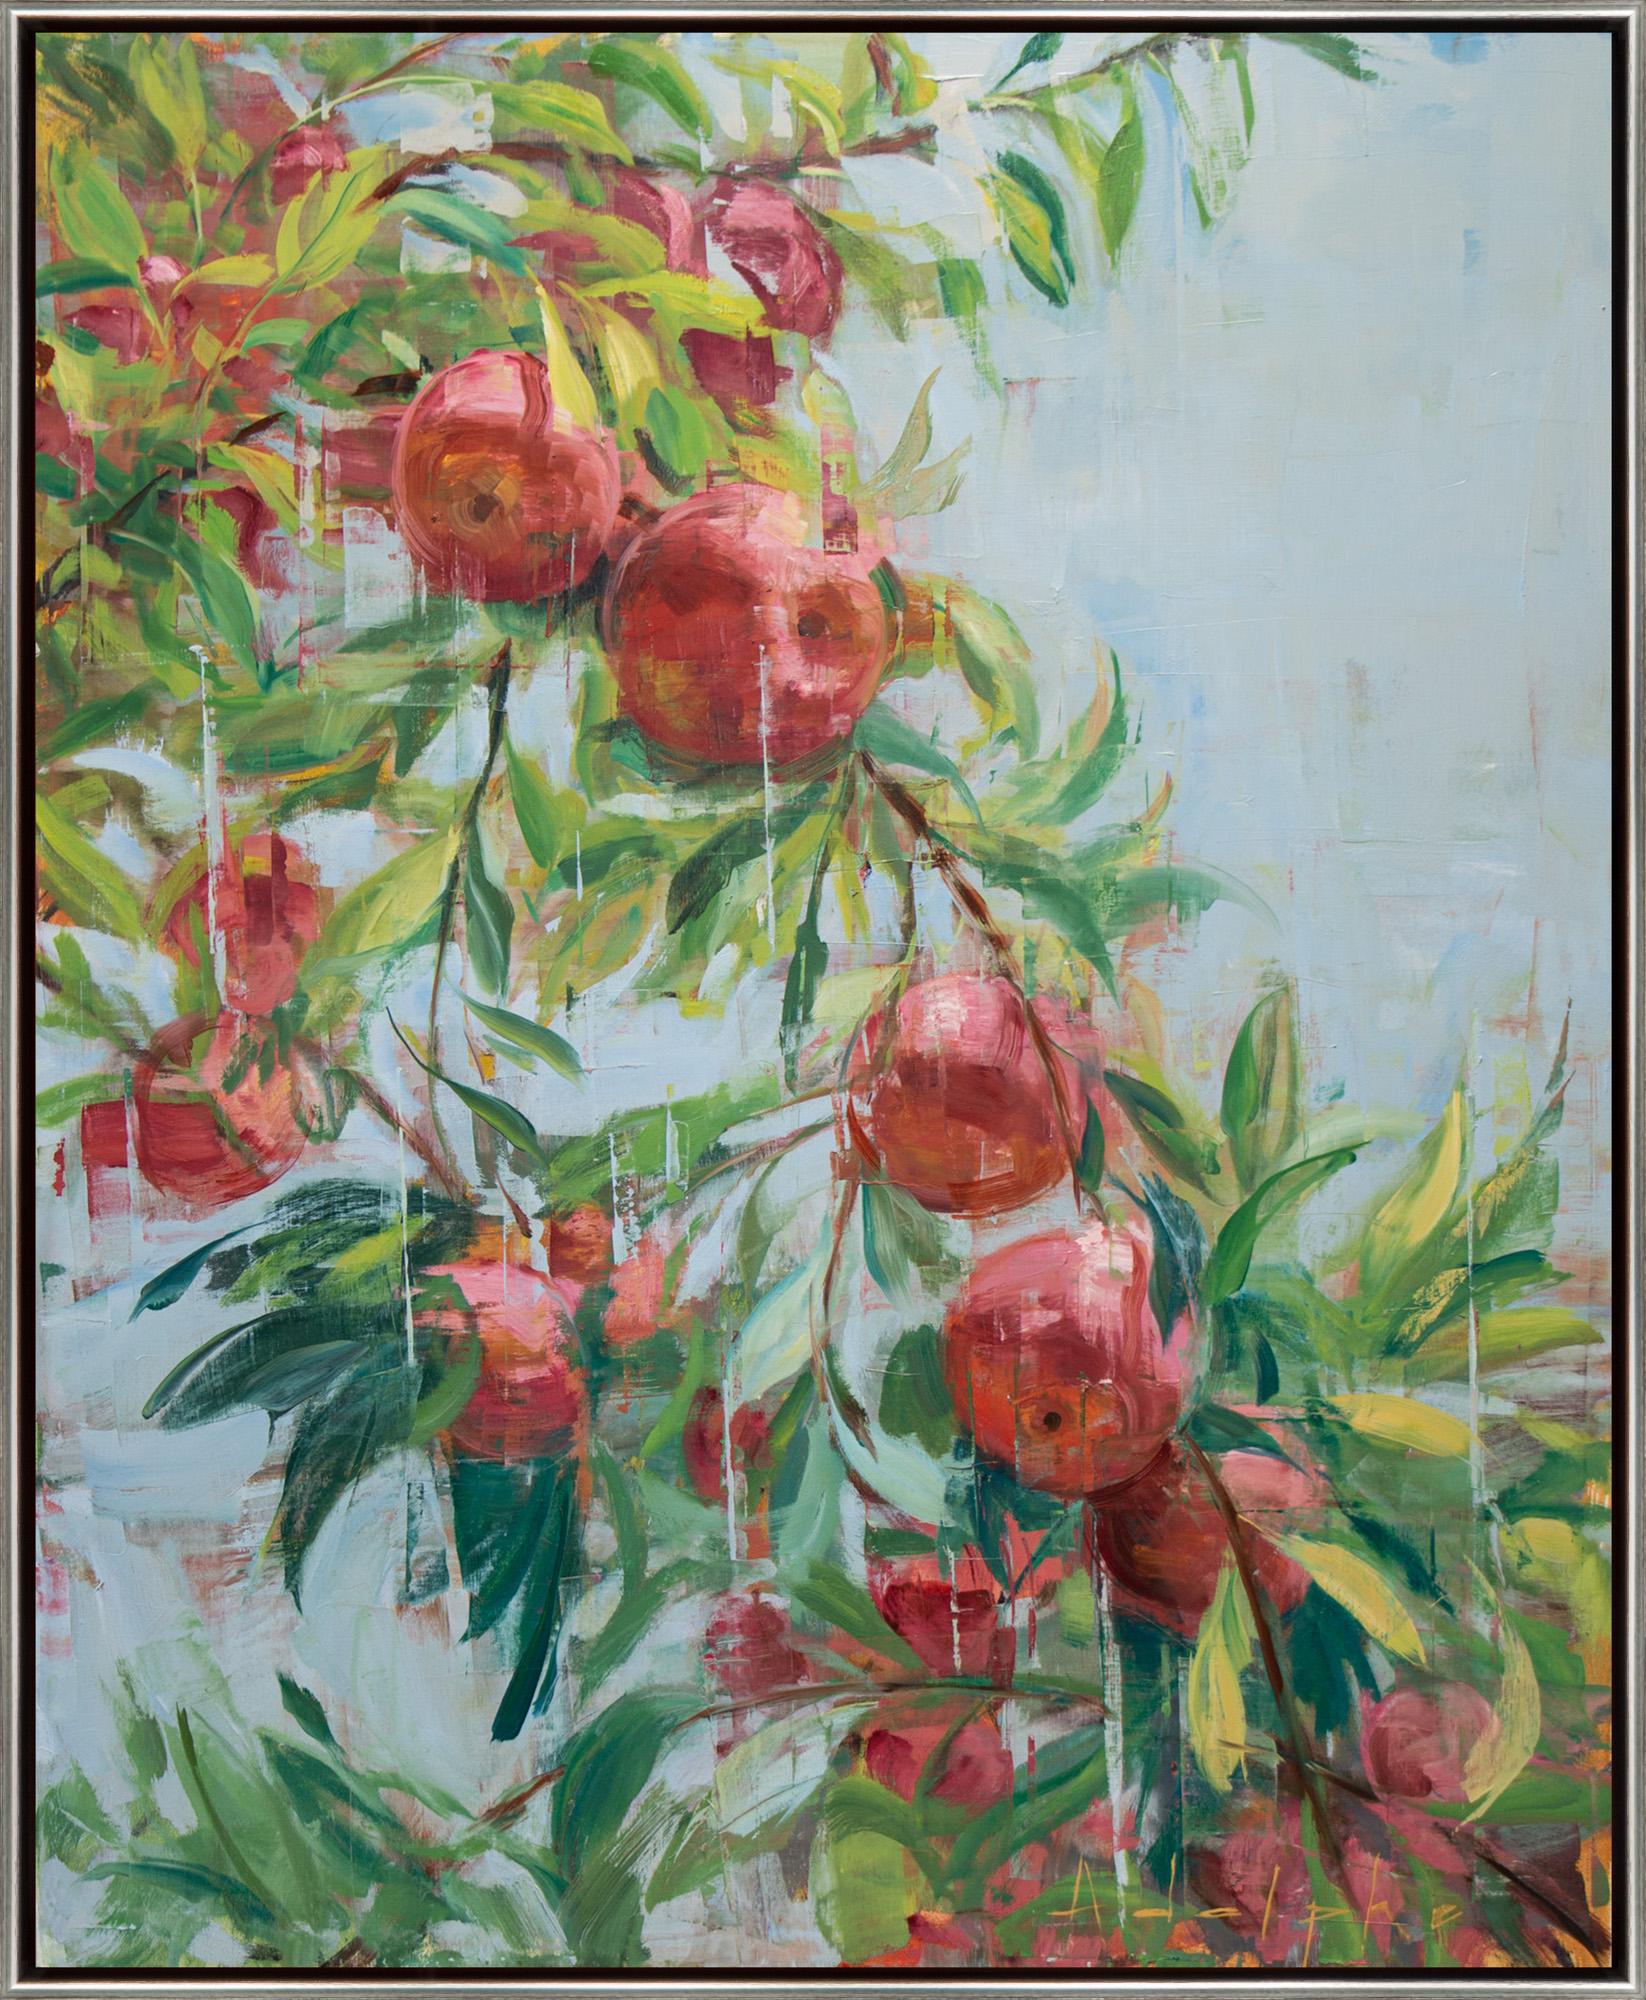 "Ripe No. 9" is a framed oil on canvas painting by Joseph Adolphe, depicting a productive branch of apples, heavy with fruit. The artist's careful use of color perfectly captures the sun-dappled fruit, their ripe flesh seeming to glow from within,